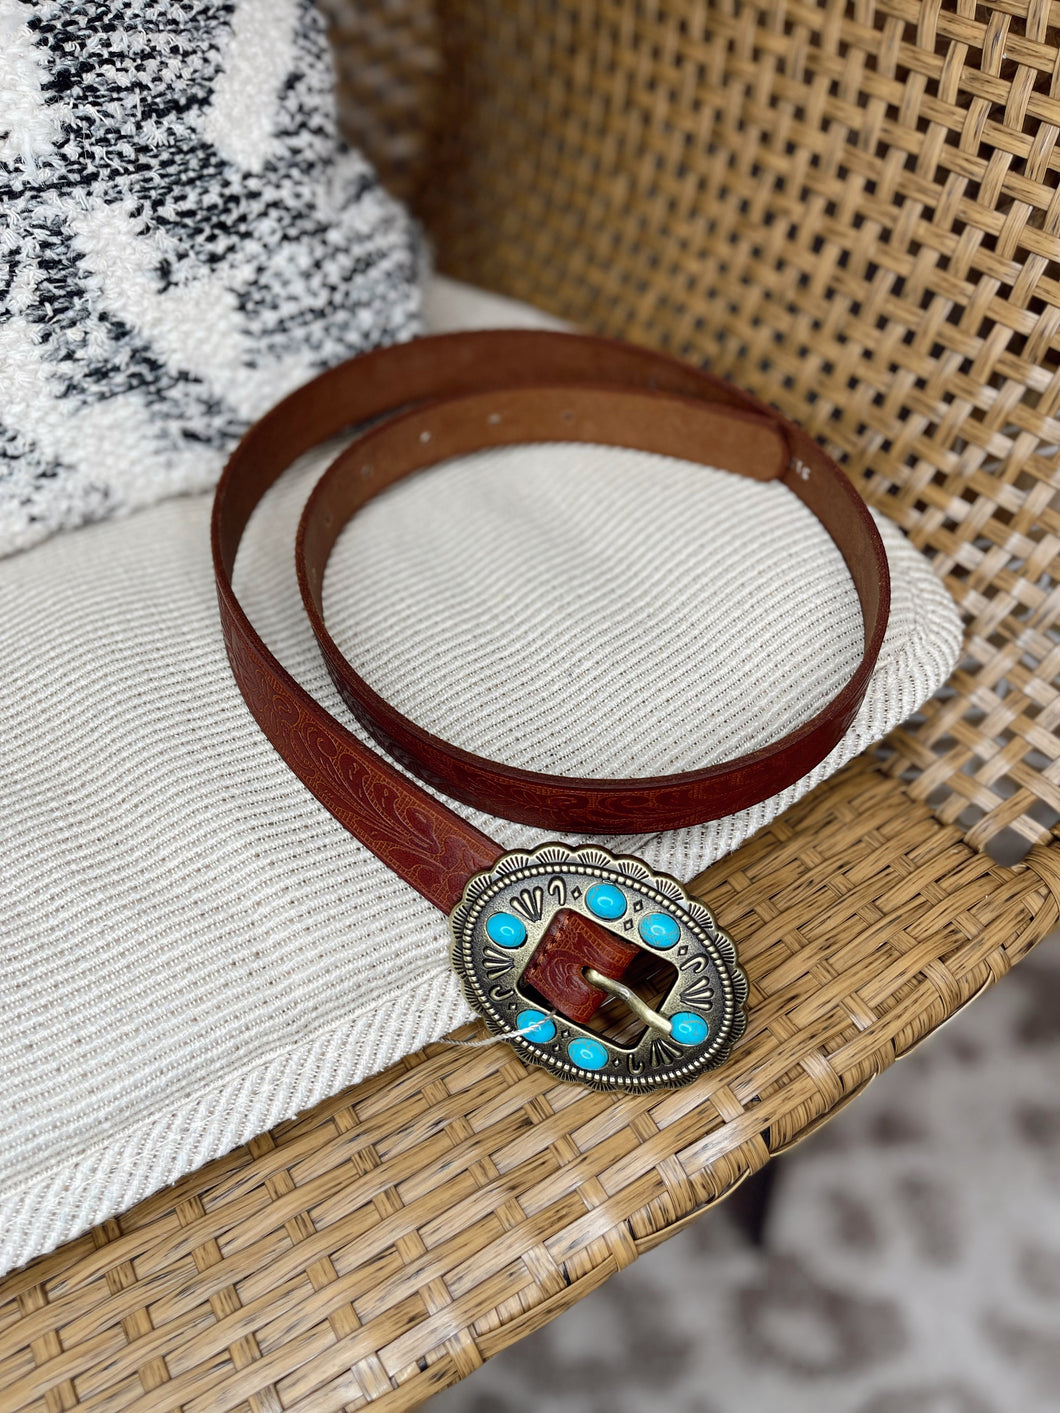 Tooled Leather Belt with Turquoise Stone Buckle